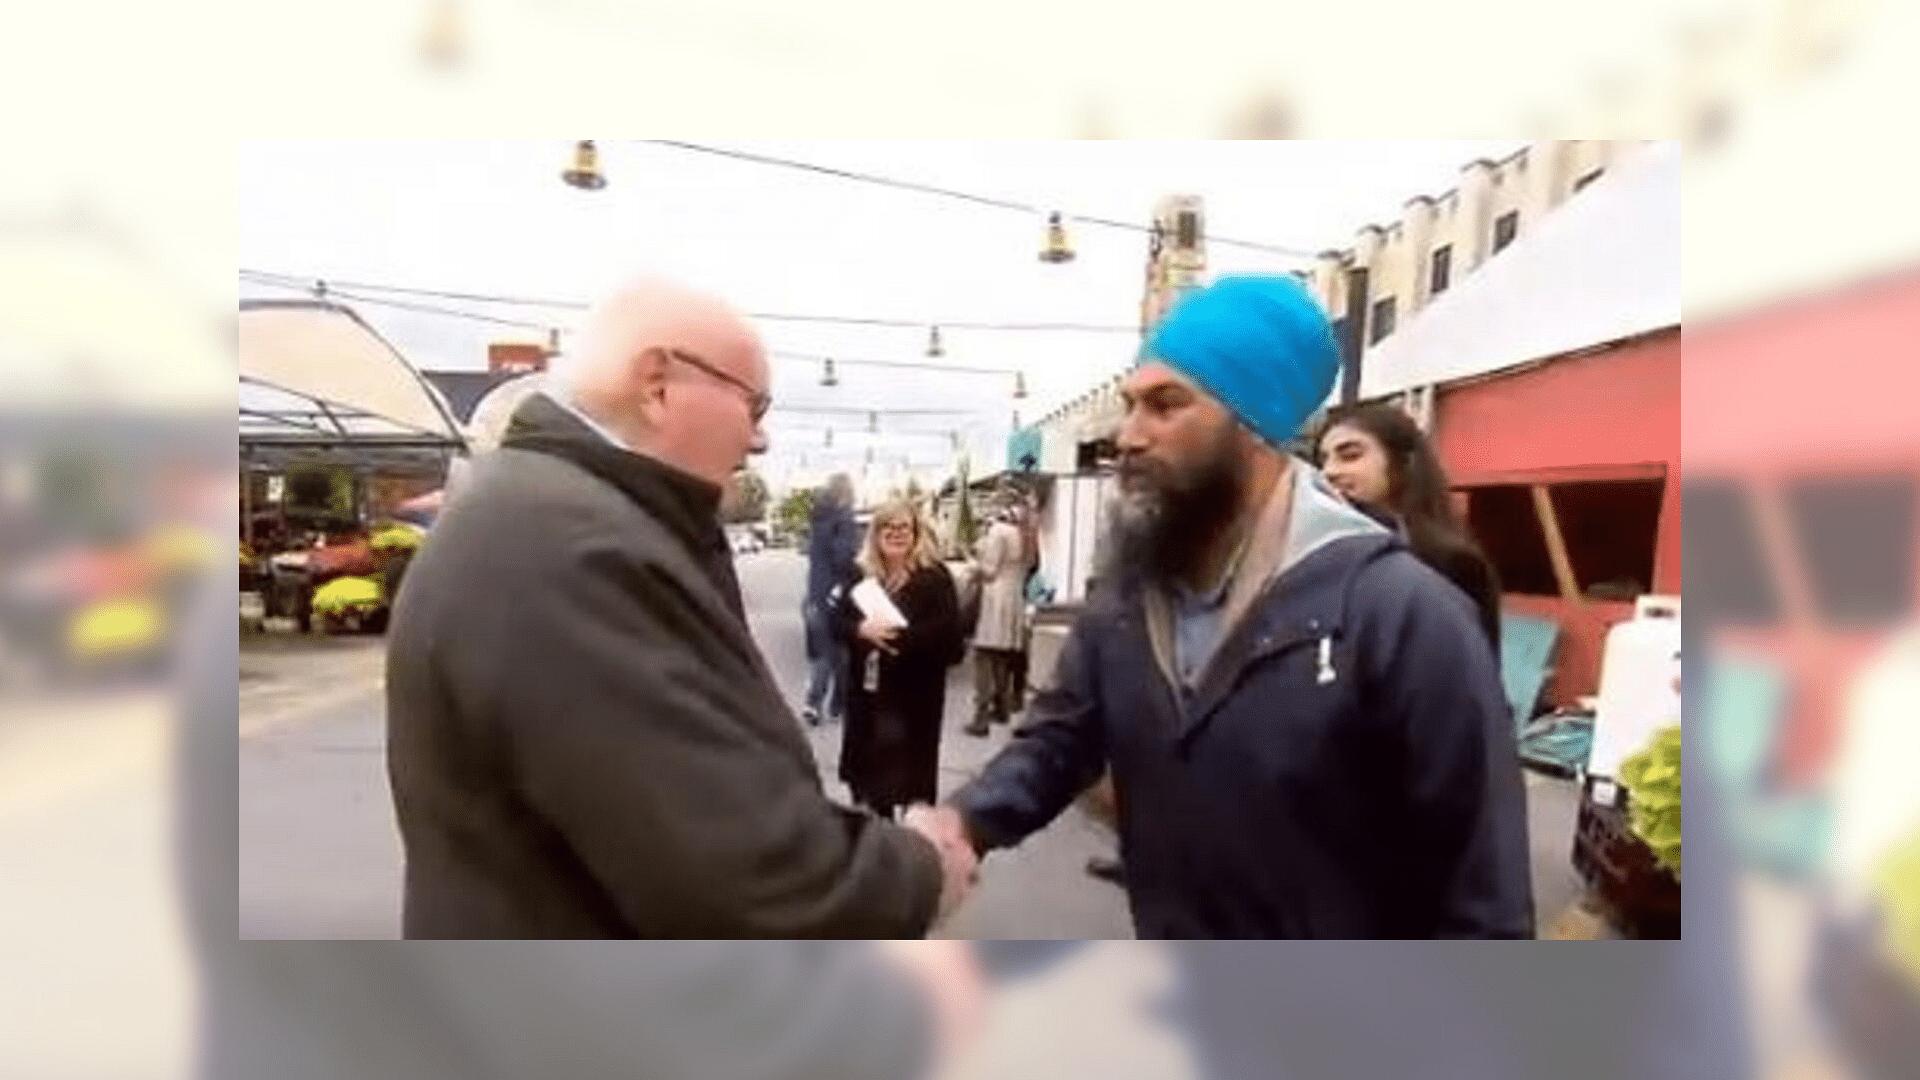 Canada’s NDP leader Jagmeet Singh interacting with voters in Montreal.